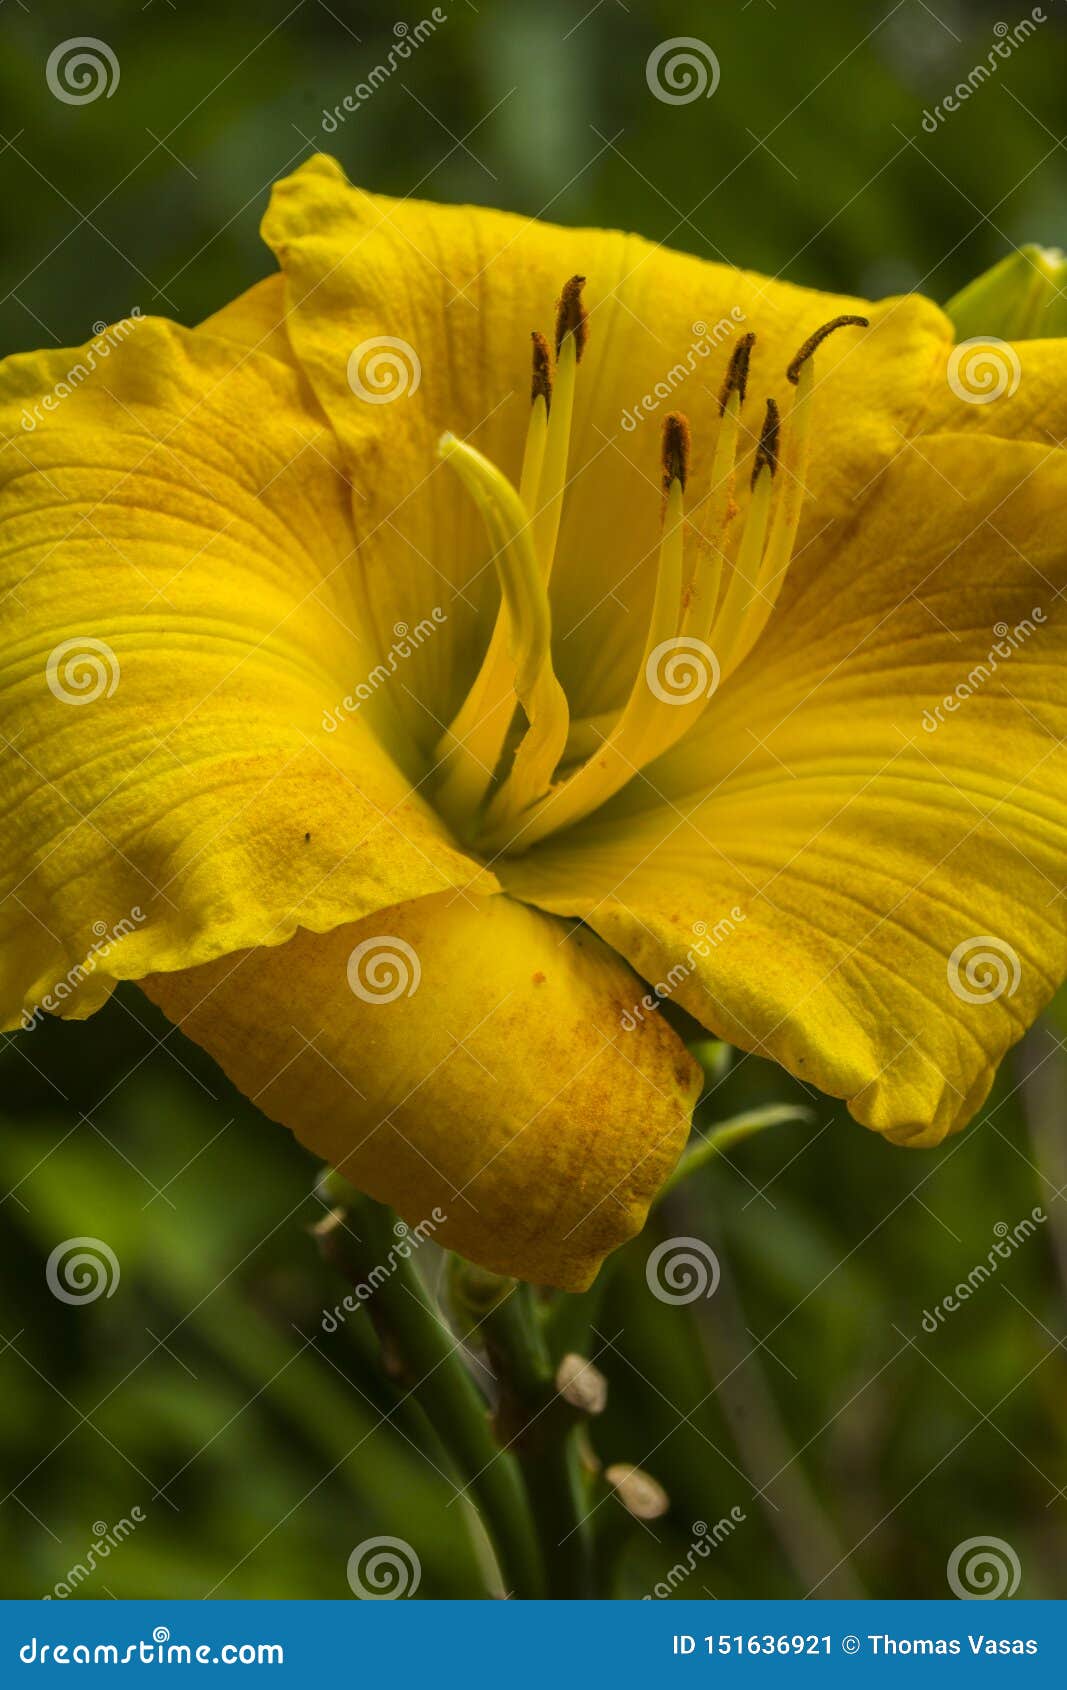 The Yellow Flower At The Gardens Stock Image Image Of Brown